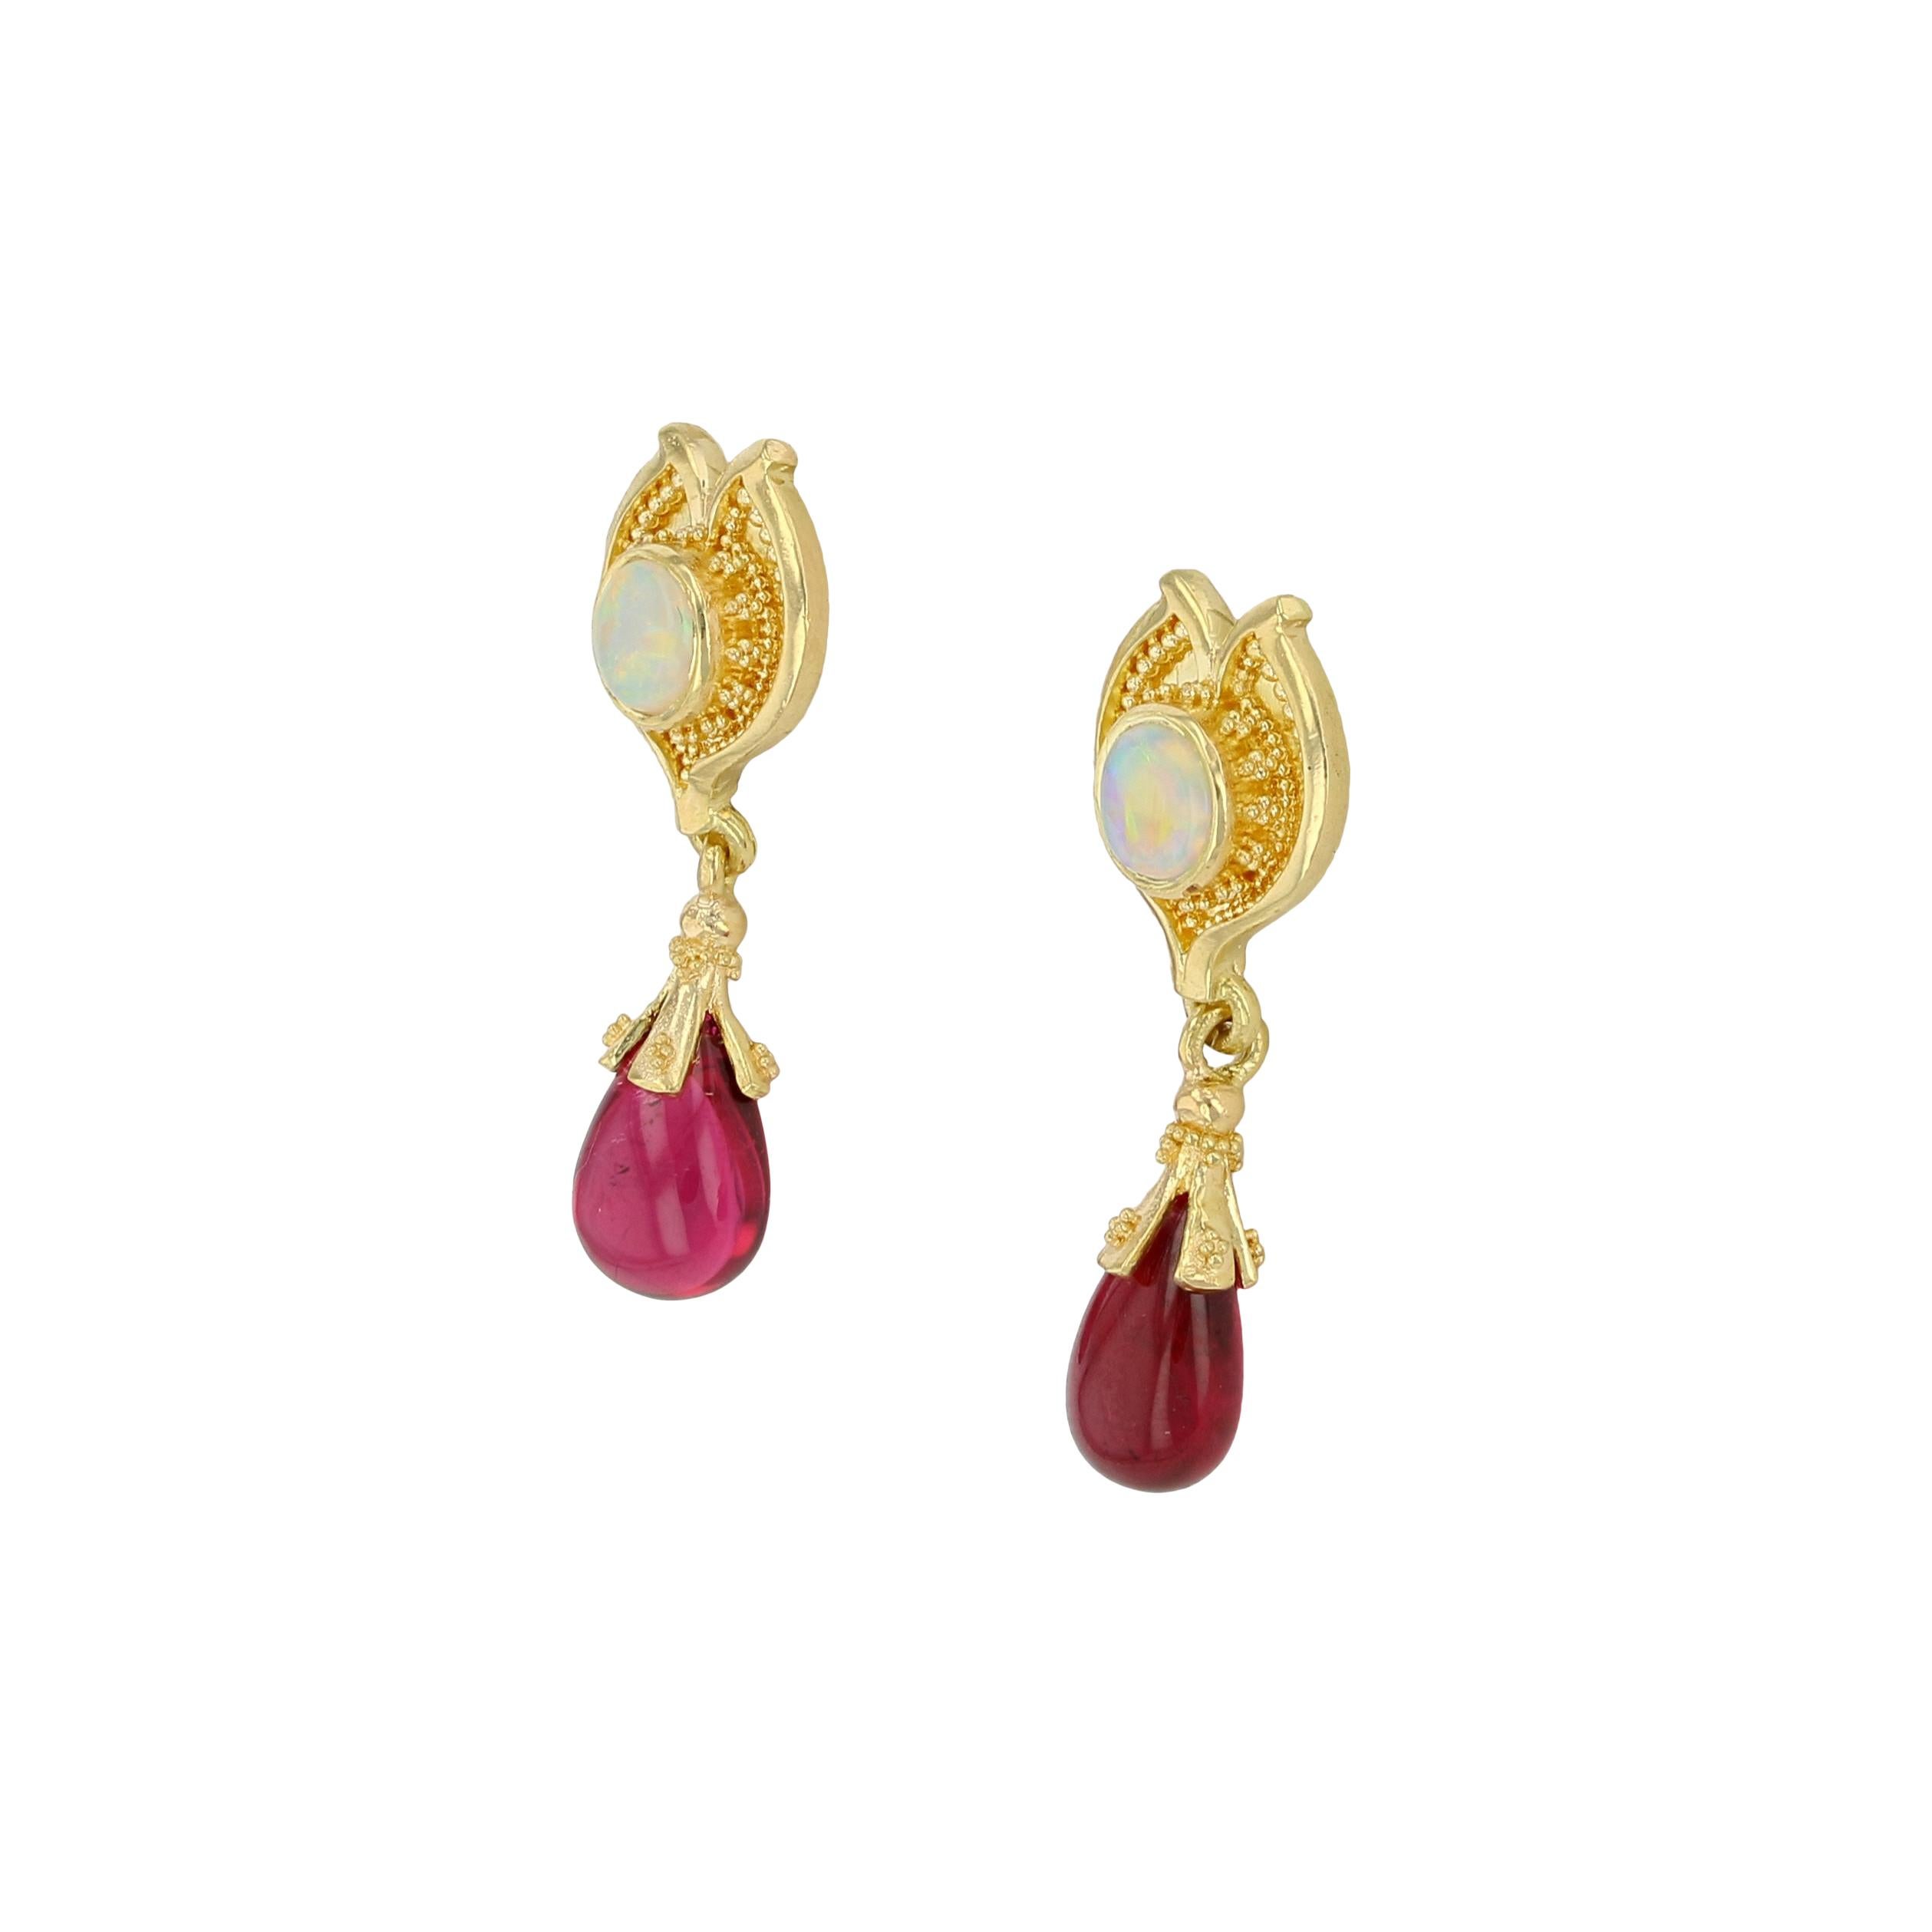 Kent Raible 18 Karat Gold Australian Opal and Rubellite Earrings, Granulation In New Condition For Sale In Mossrock, WA